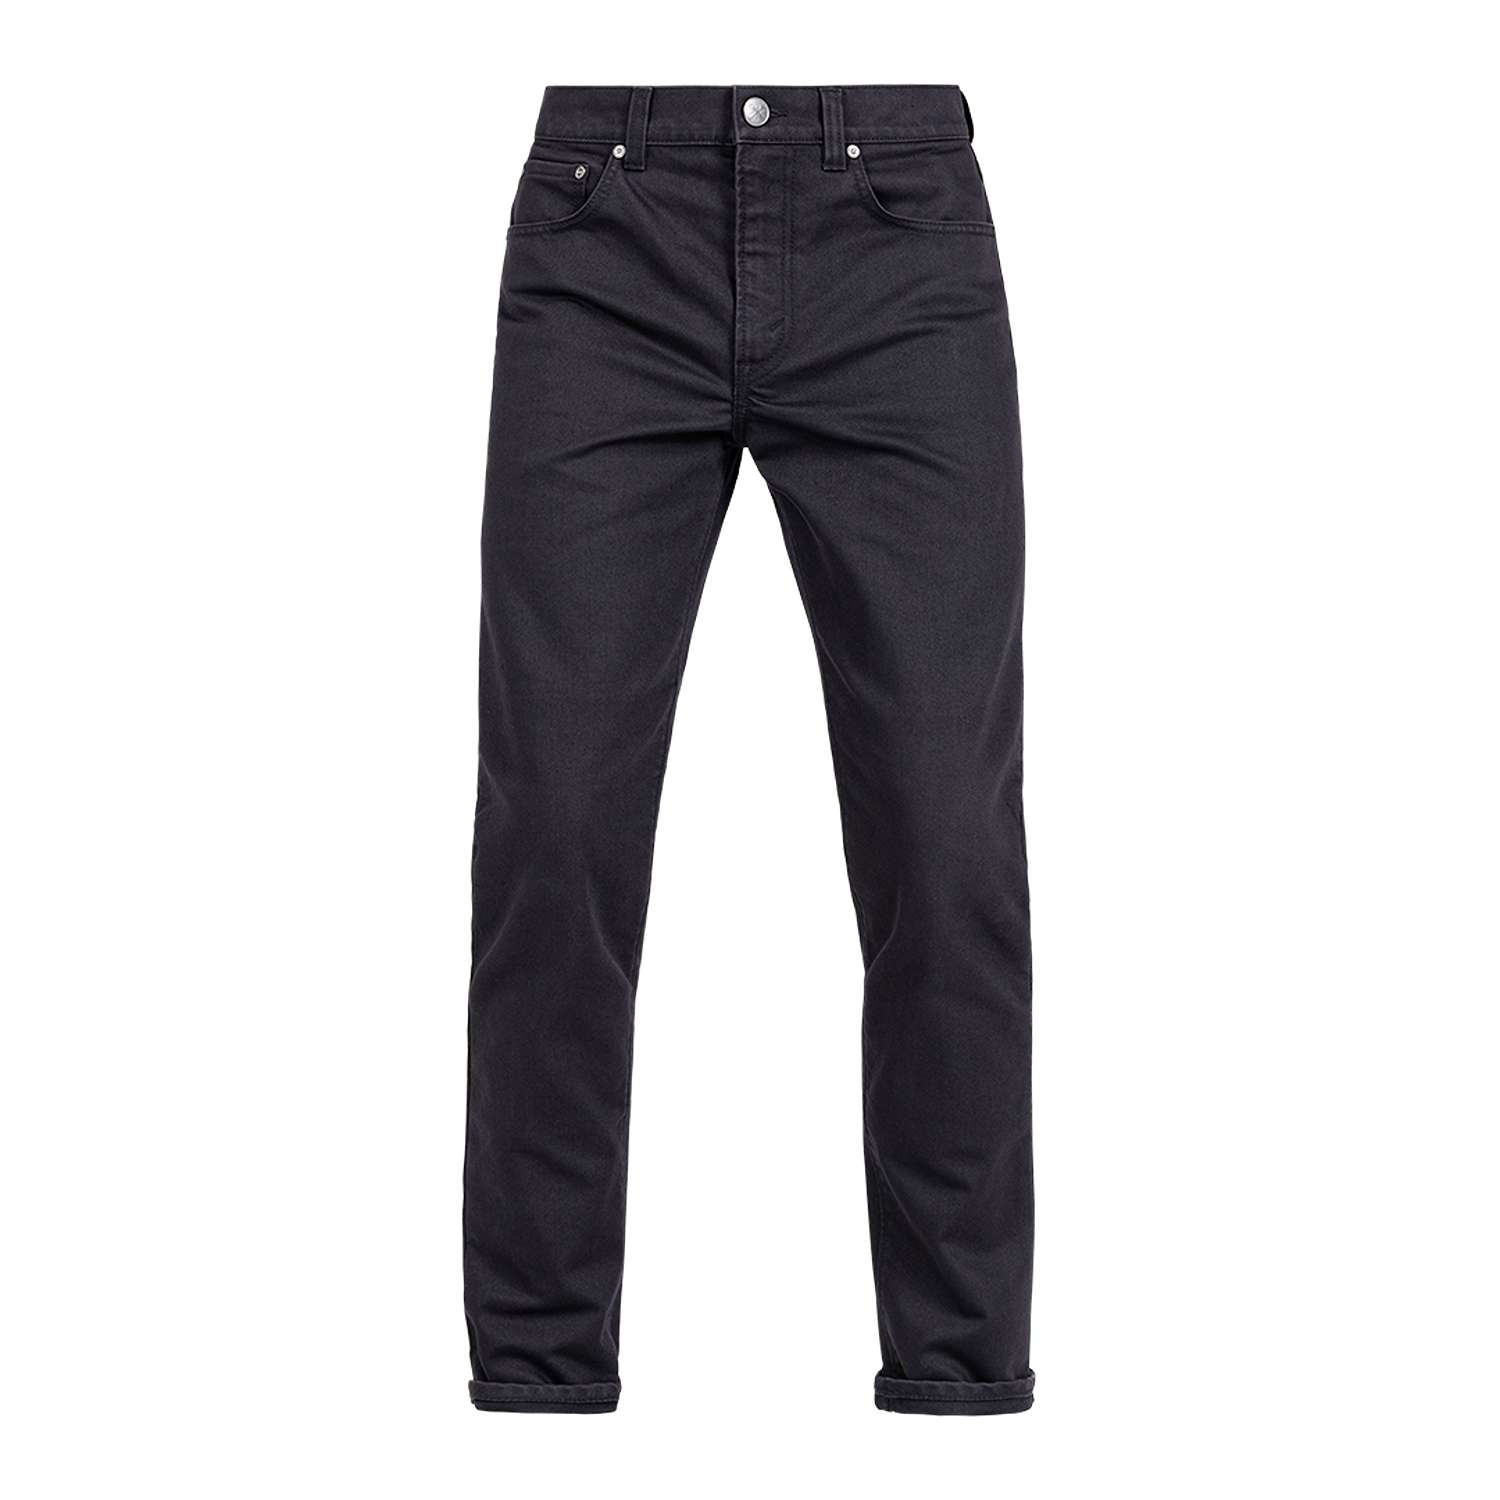 Image of John Doe Classic Tapered Jeans Black Black Taille W34/L32